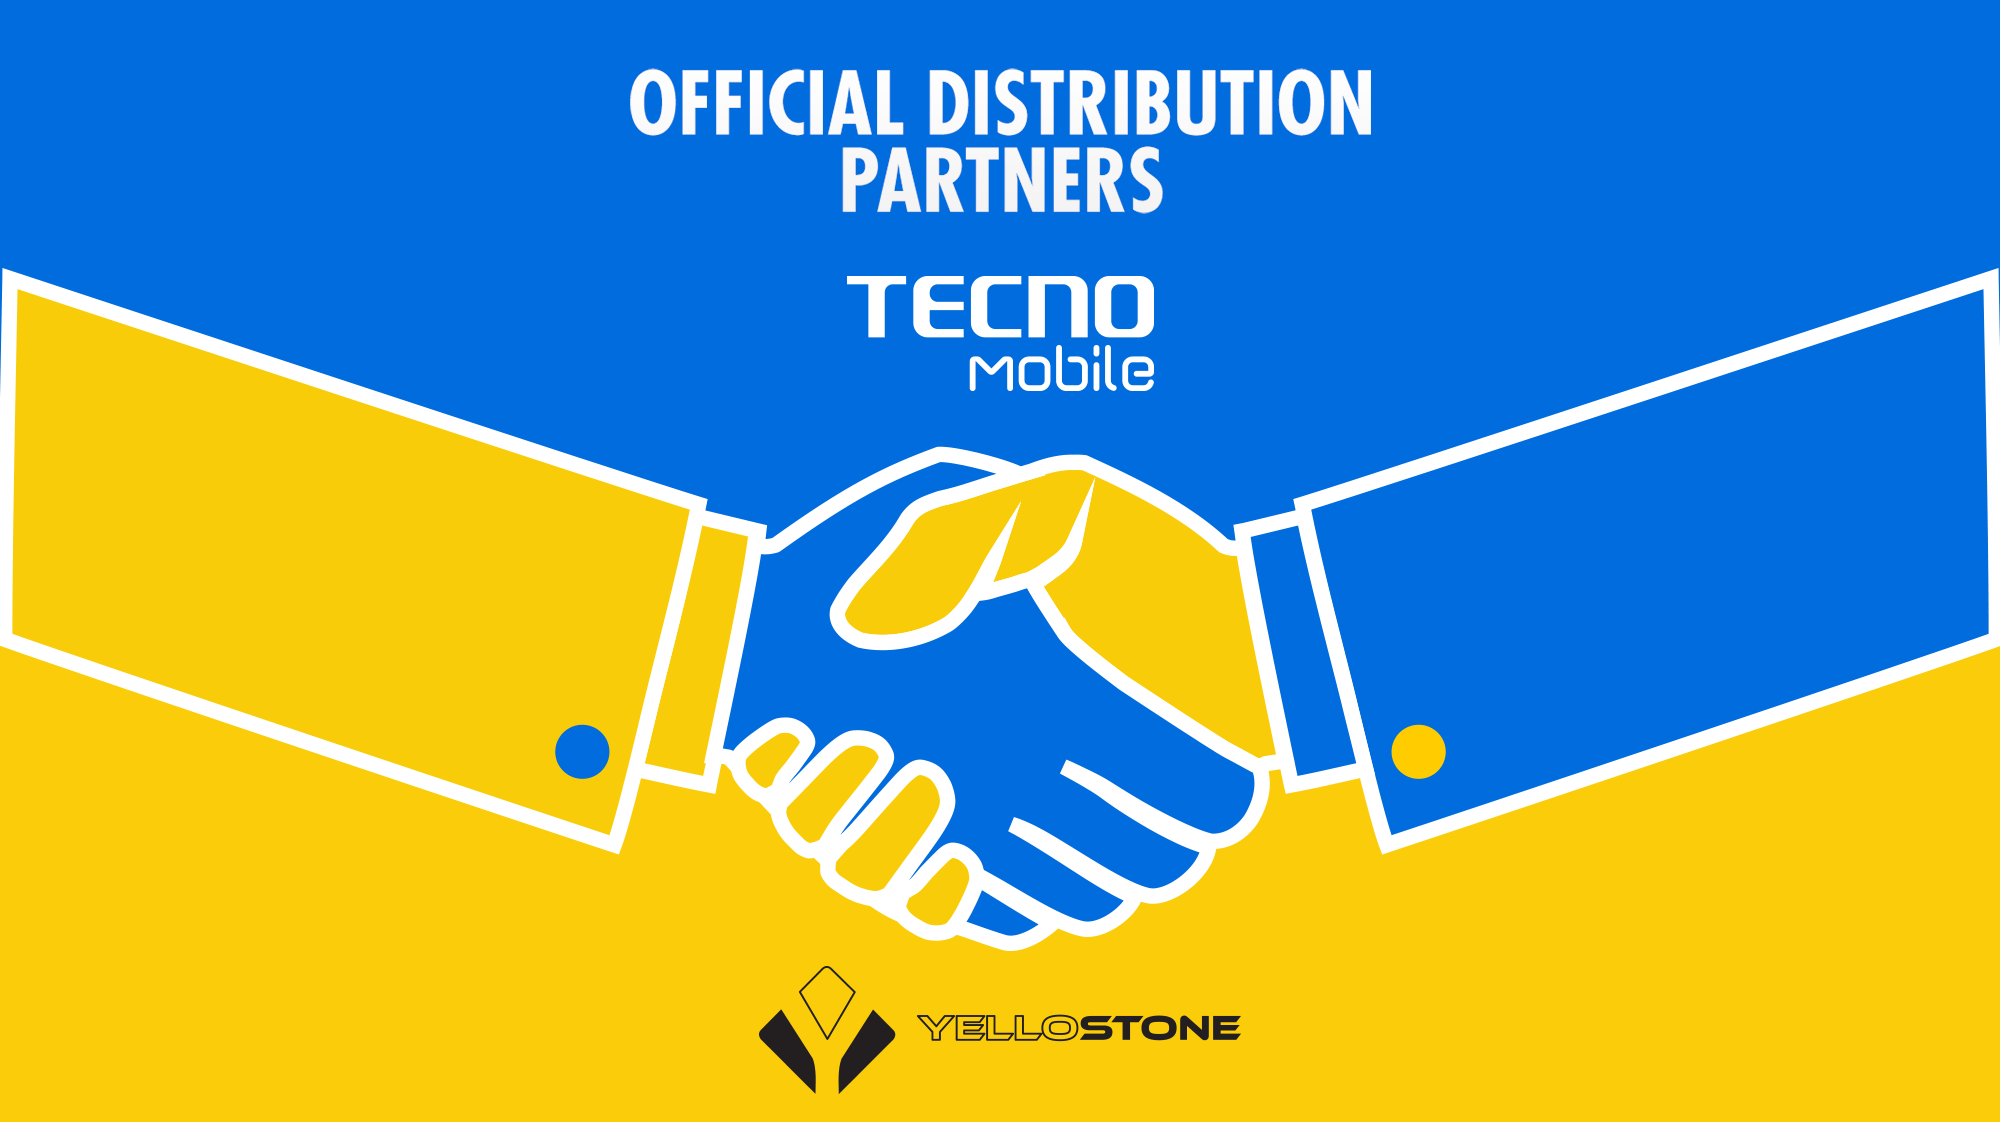 TECNO Mobile HAS A NEW OFFICIAL DISTRIBUTION PARTNER; THE YELLOSTONE